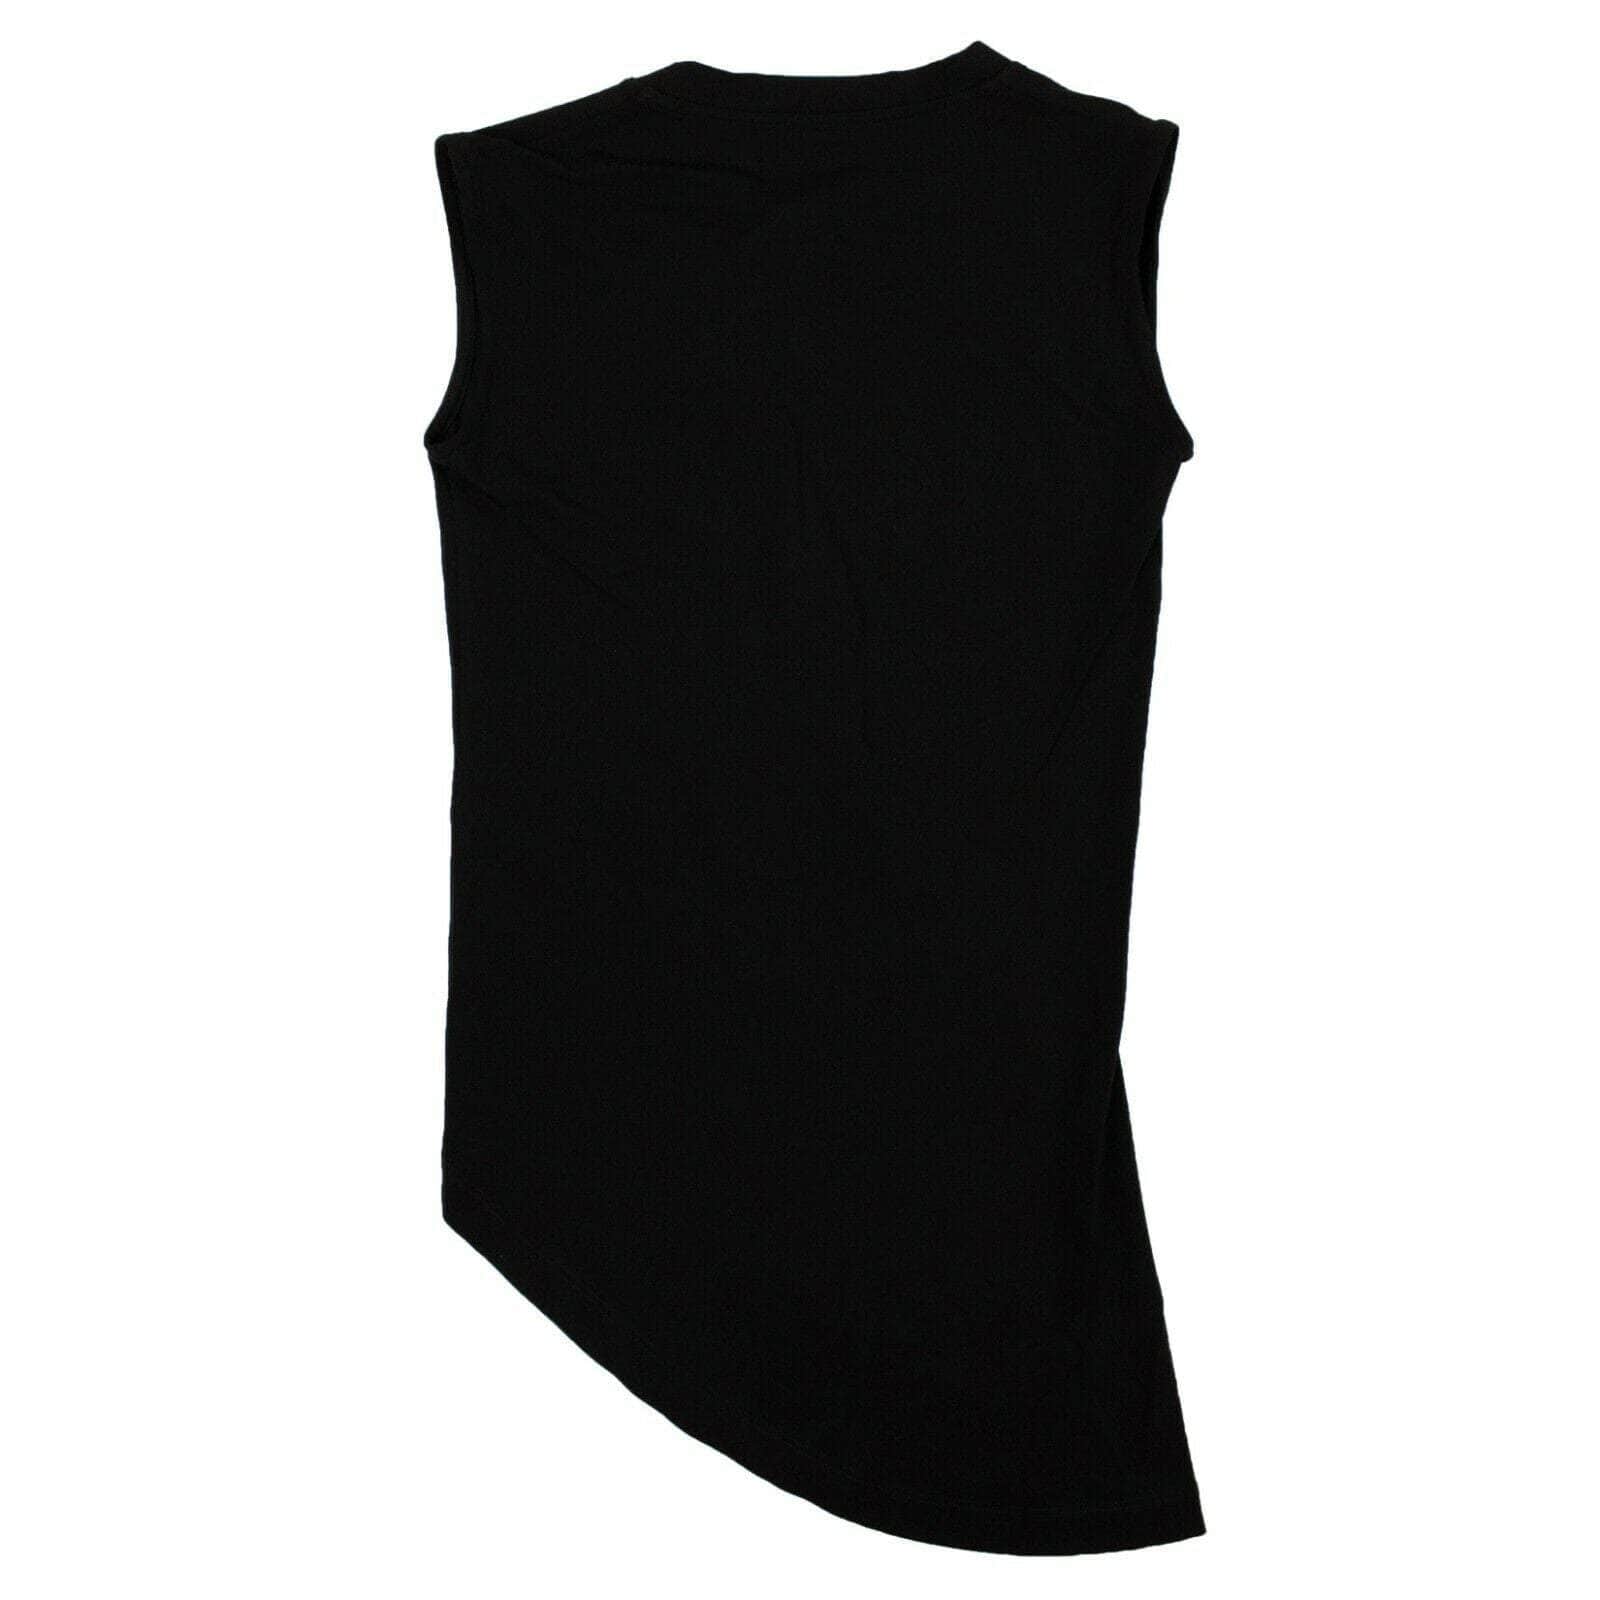 UNRAVEL PROJECT channelenable-all, couponcollection, gender-womens, main-clothing, sale-enable, size-s, under-250, unravel-project, womens-blouses S Black Slim Fit Asymmetric Sleeveless Top 82NGG-UN-1075/S 82NGG-UN-1075/S